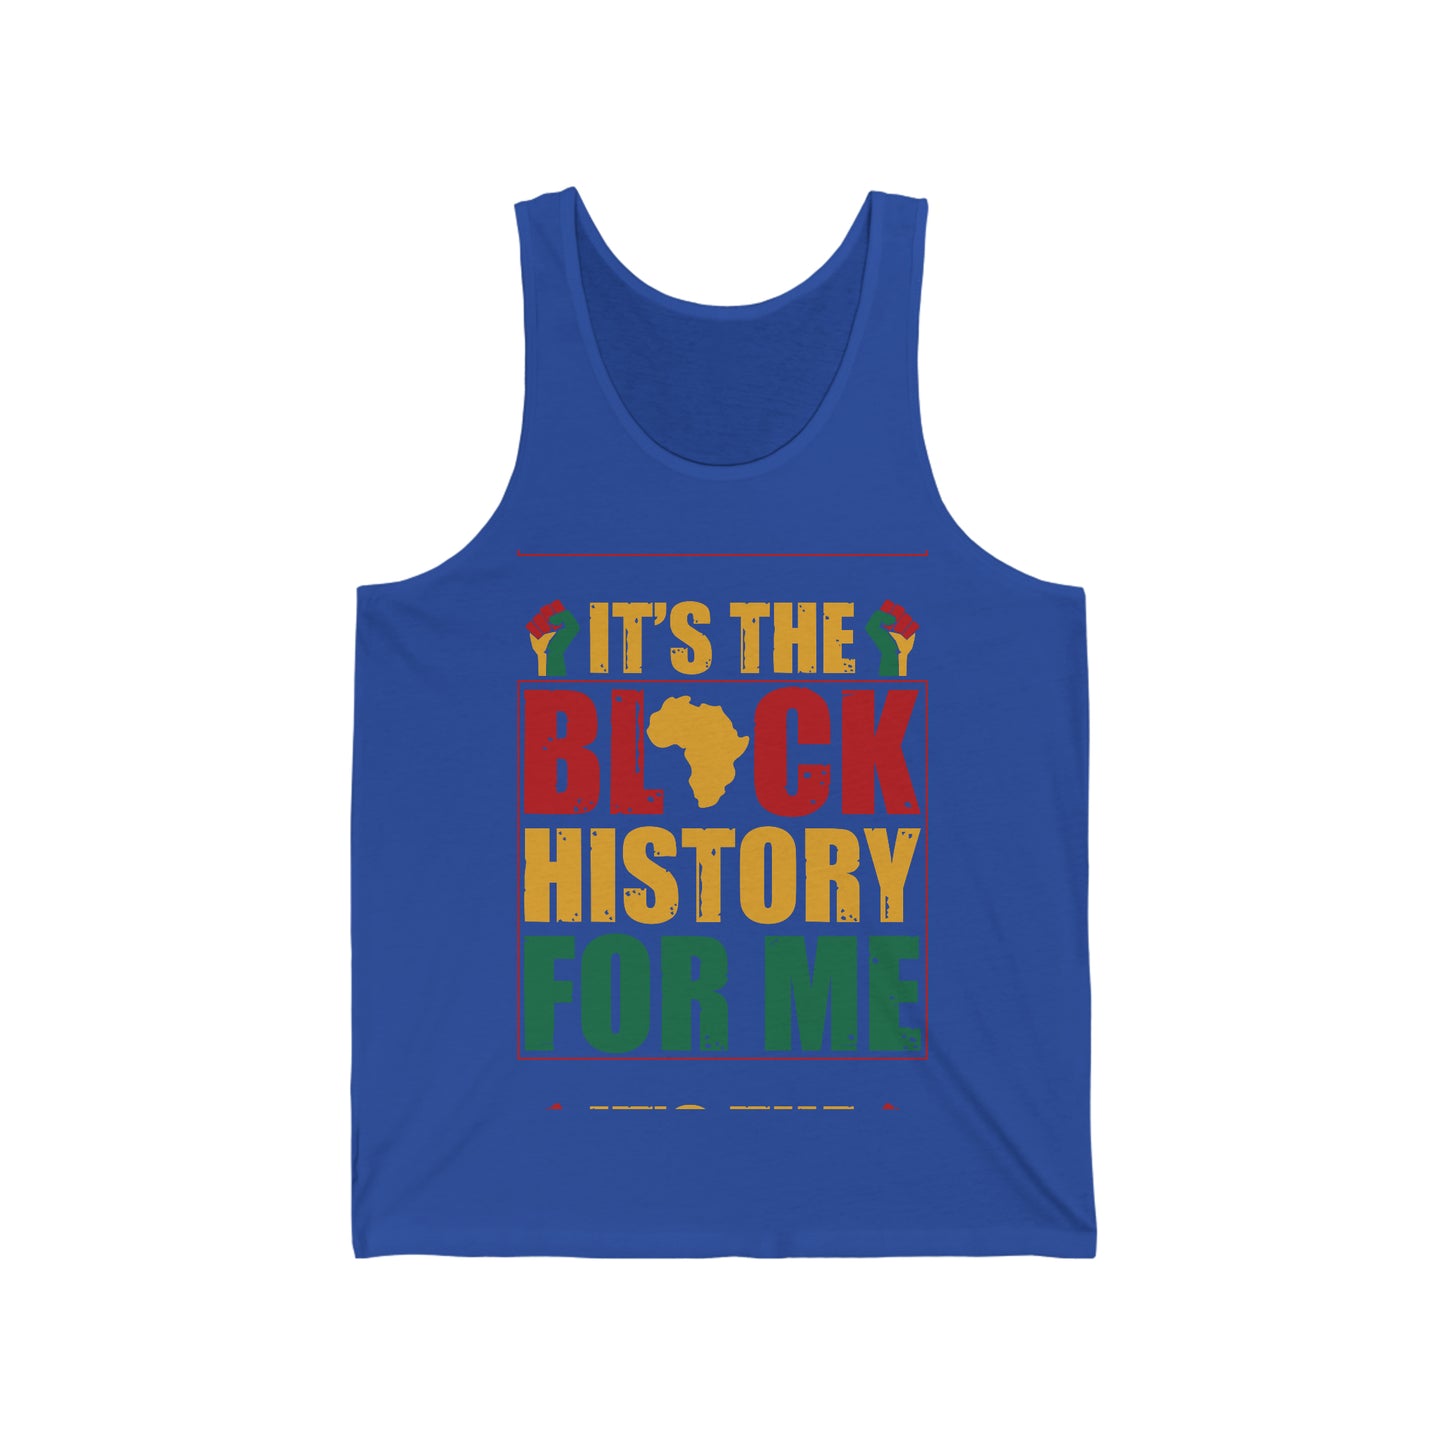 BELLA CANVAS - Unisex Jersey Tank - IT'S THE BLACK HISTORY FOR ME